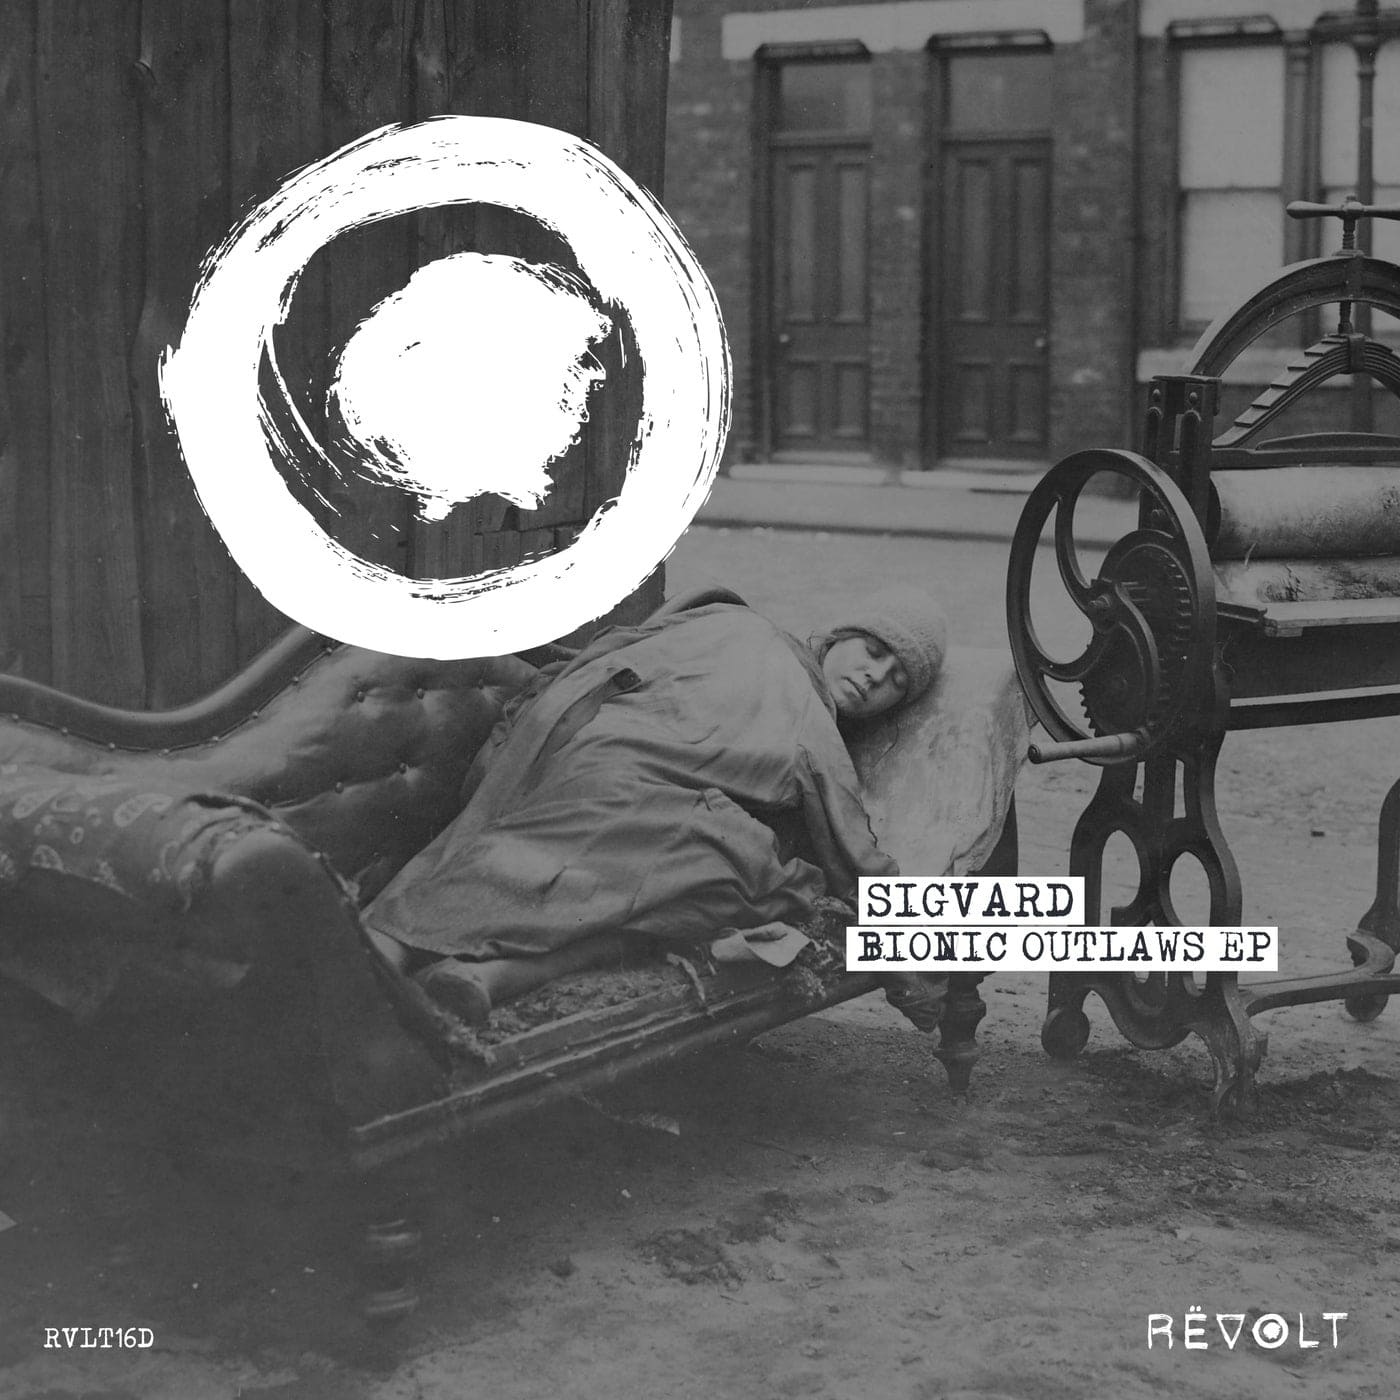 Download Sigvard - Bionic Outlaws EP on Electrobuzz